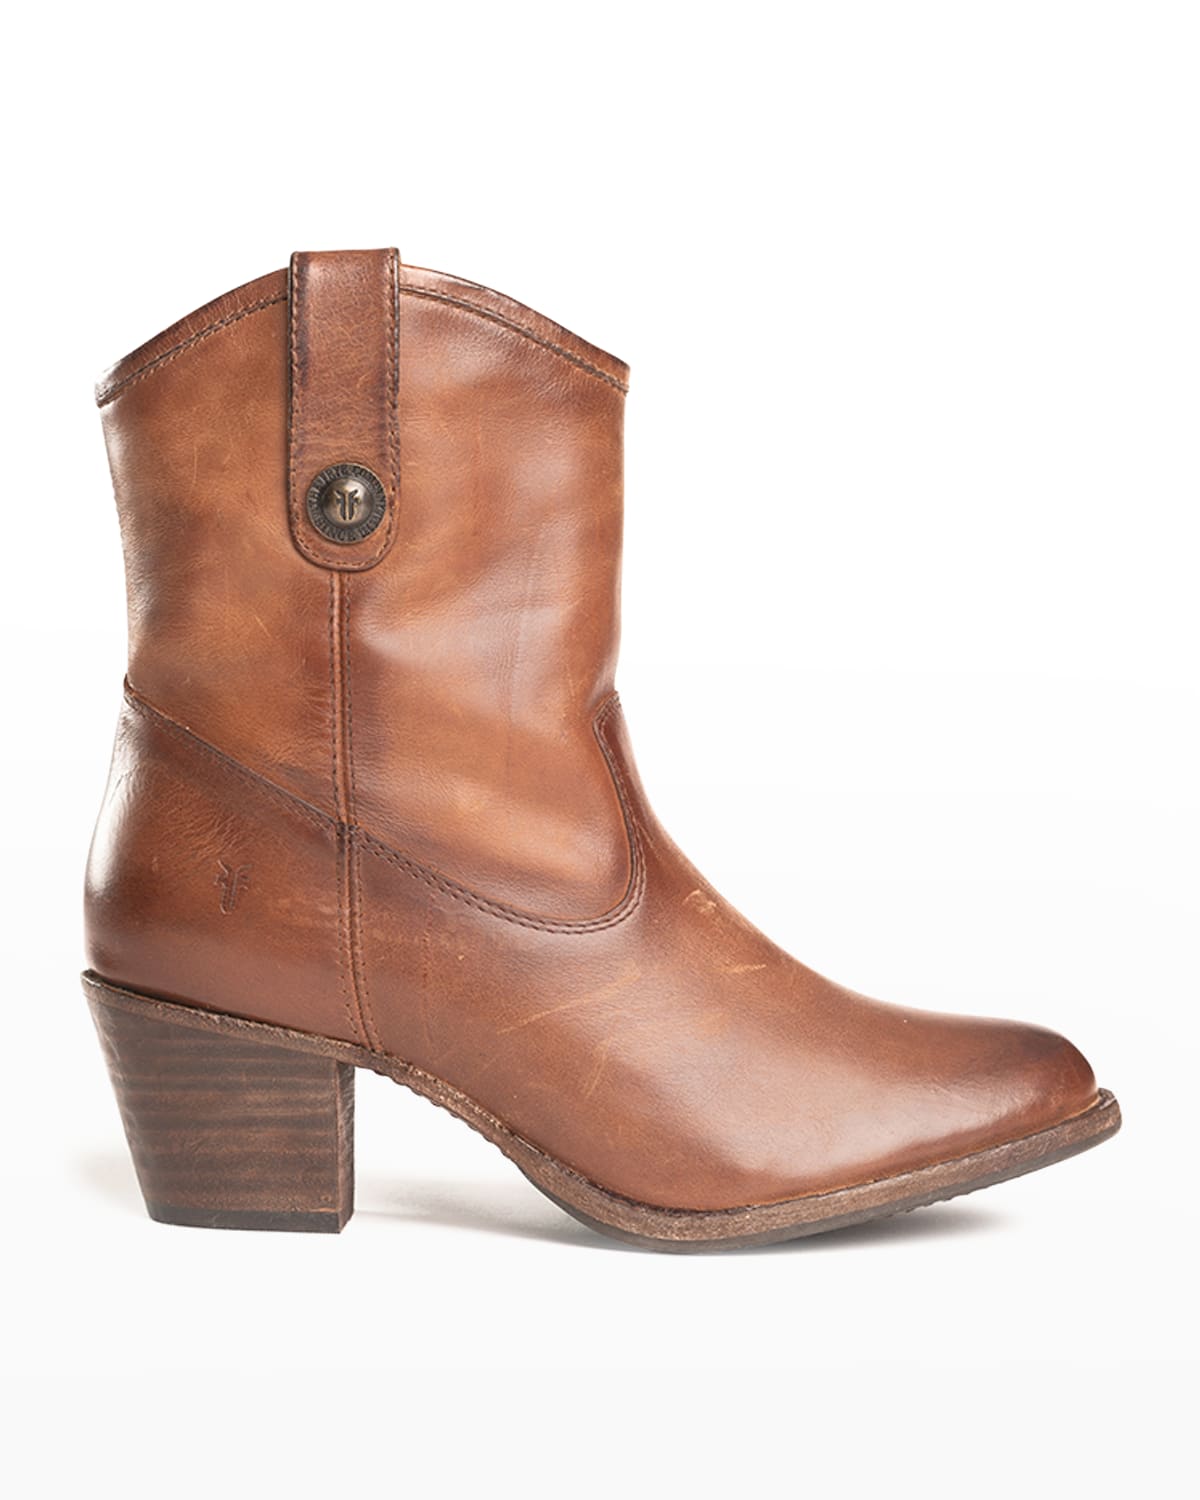 FRYE JACKIE LEATHER BUTTON SHORT WESTERN BOOTIES